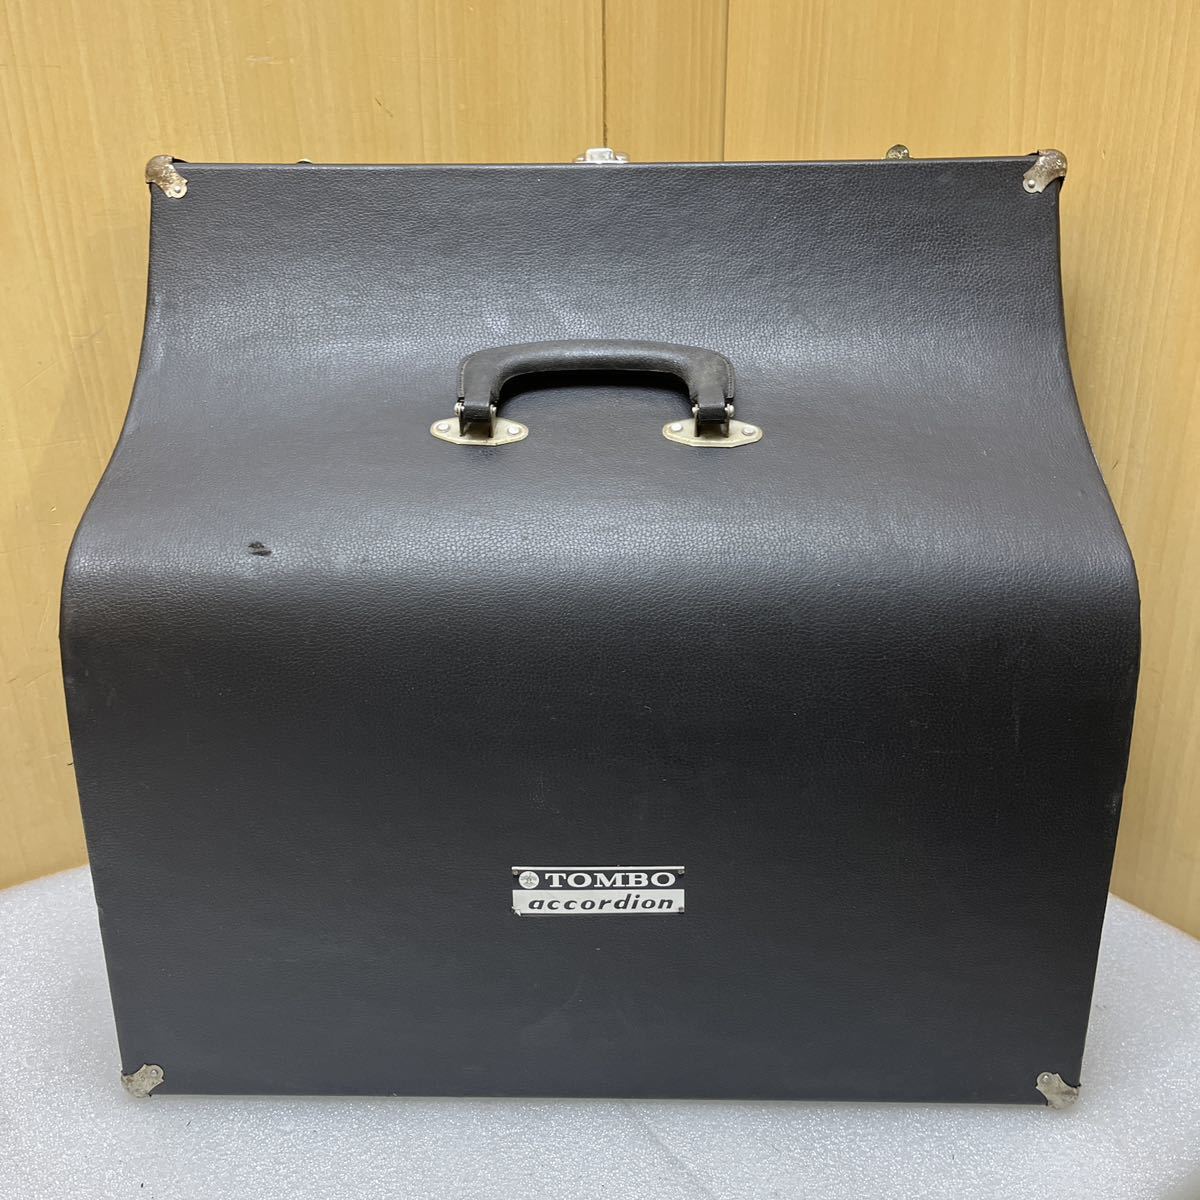 YK8718 that time thing TOMBO dragonfly accordion No 301 keyboard instruments case attaching . sound has confirmed retro present condition goods 1215